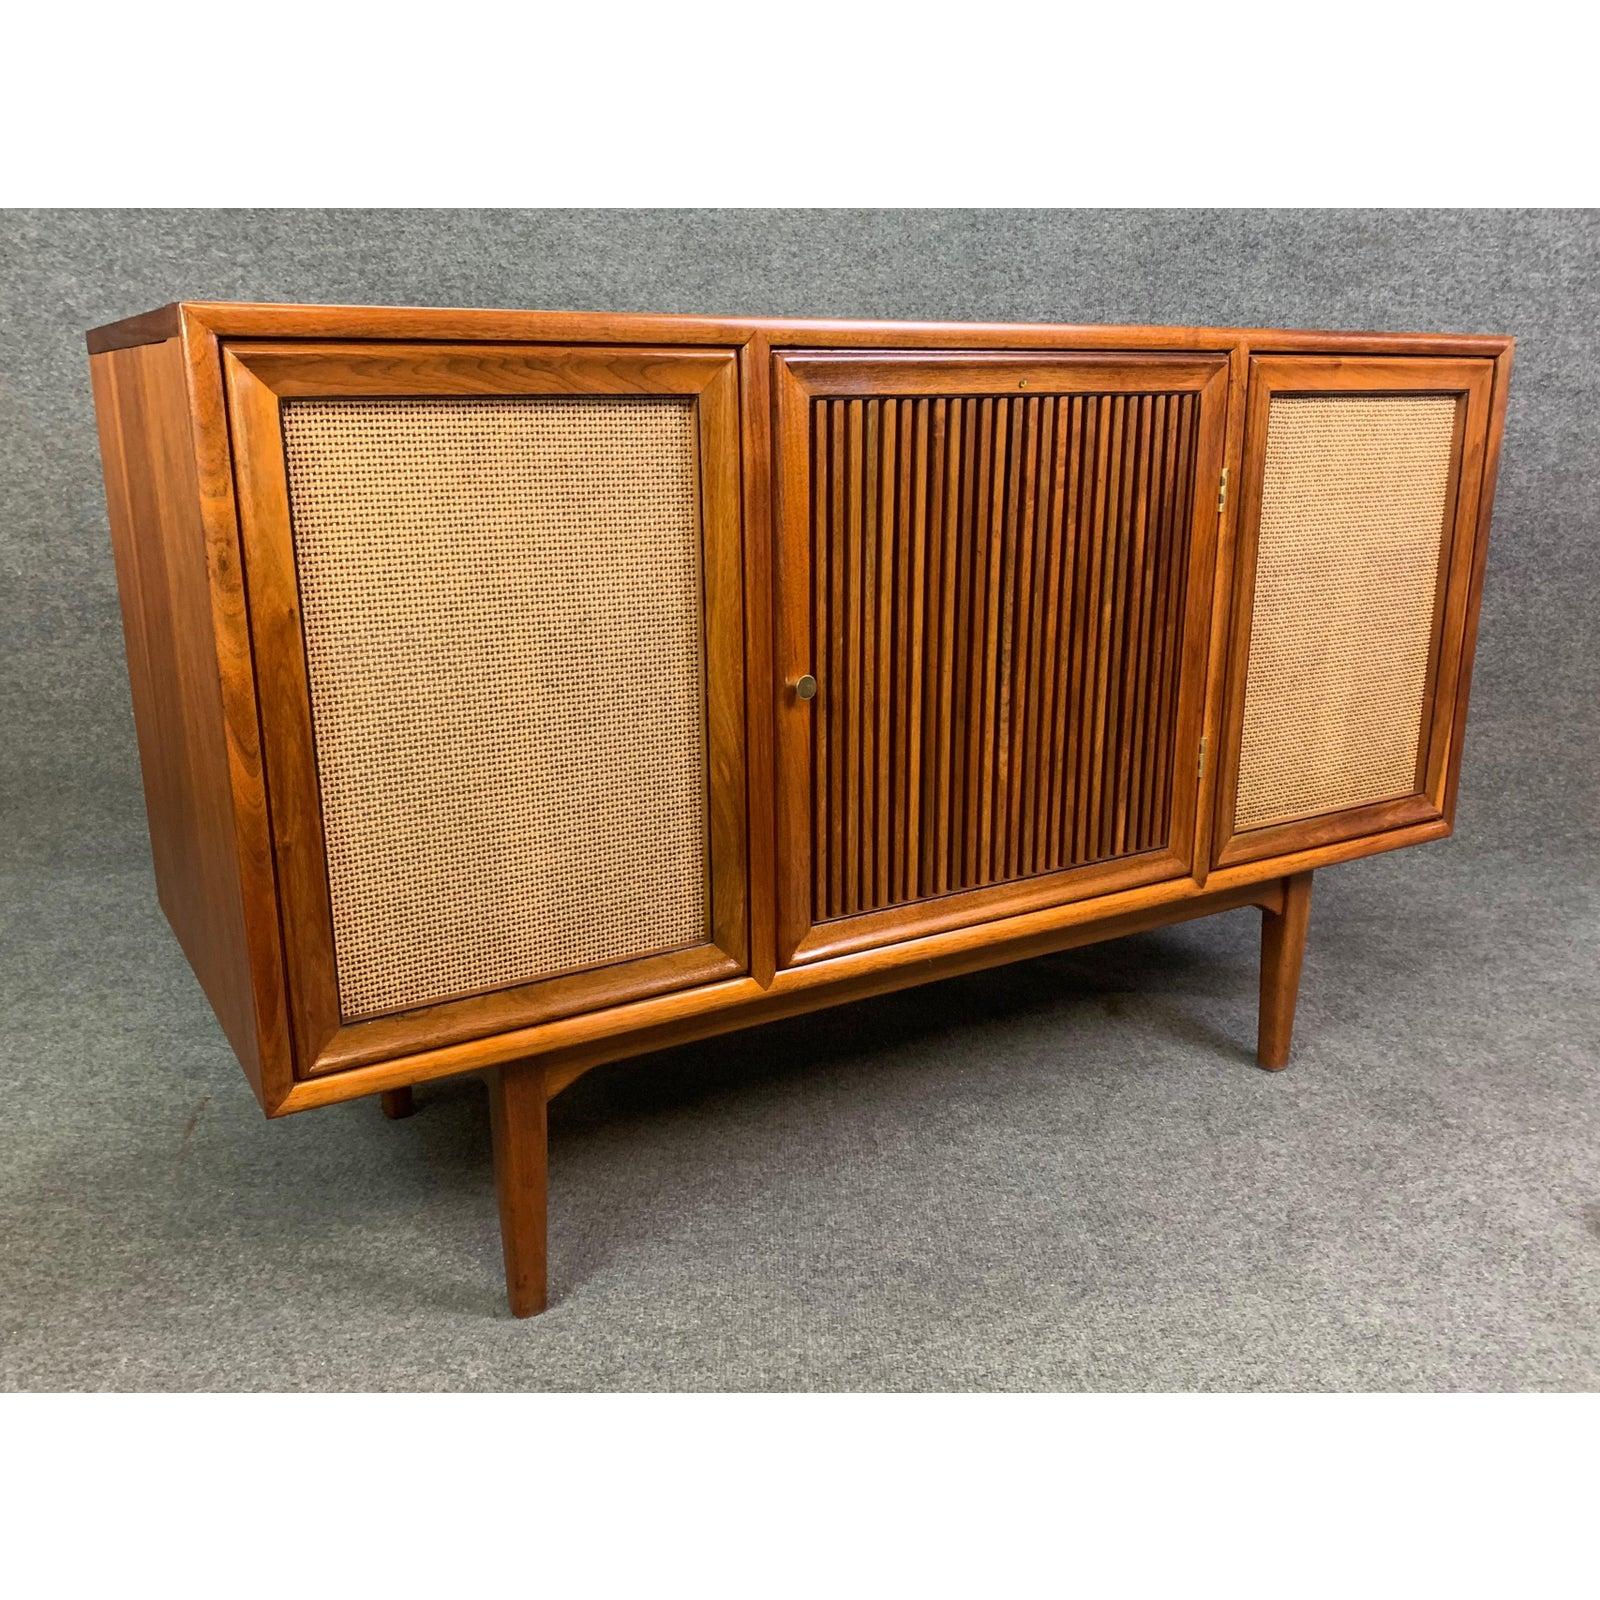 Here is a beautiful midcentury stereo console-cabinet designed by Kipp Stewart and Stewart McDougall from the sought after 